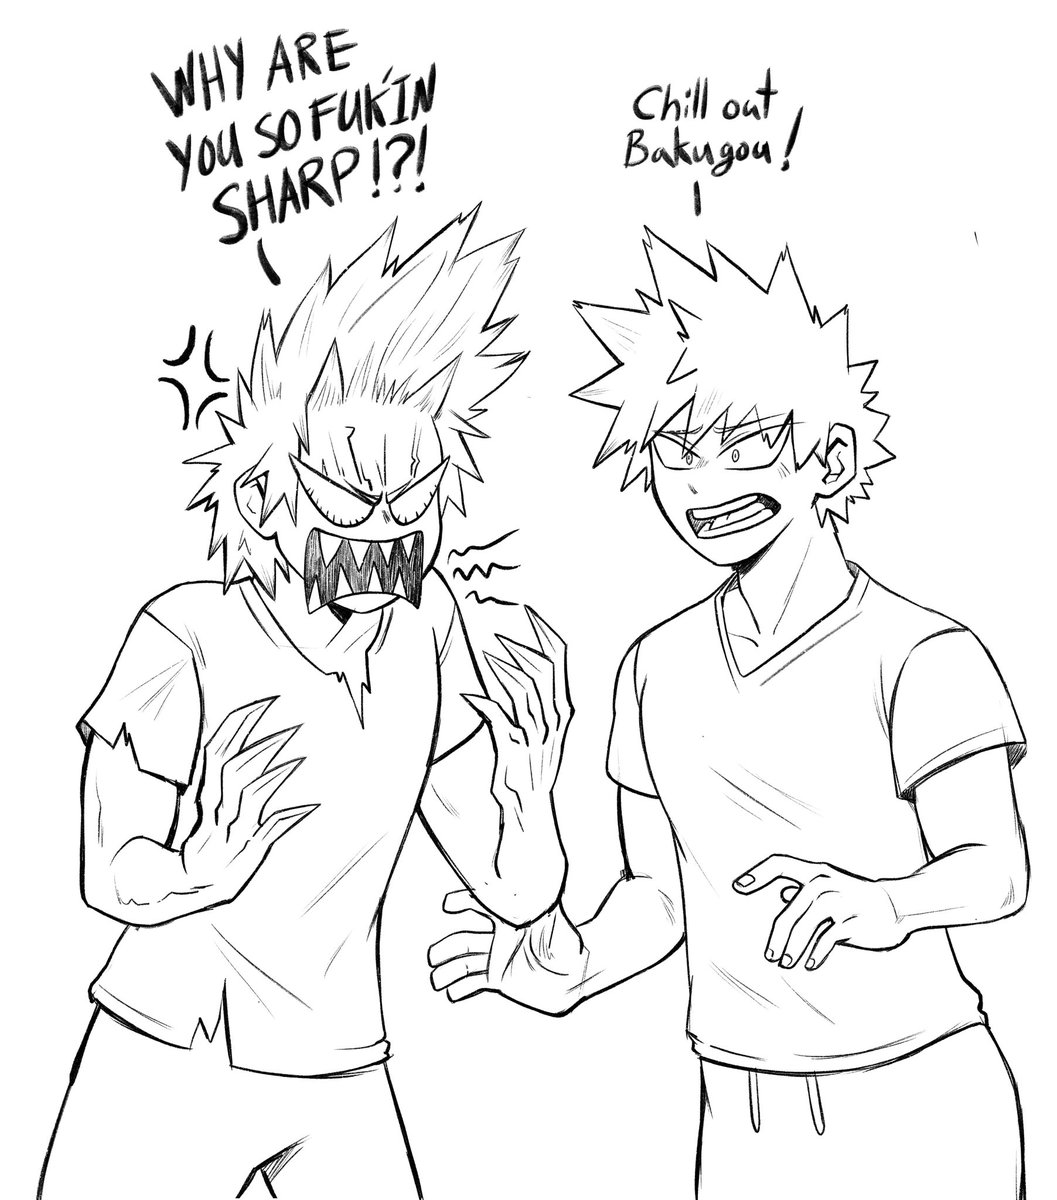 Krbk - They got hit with a quirk that made them swap bodies. ? 